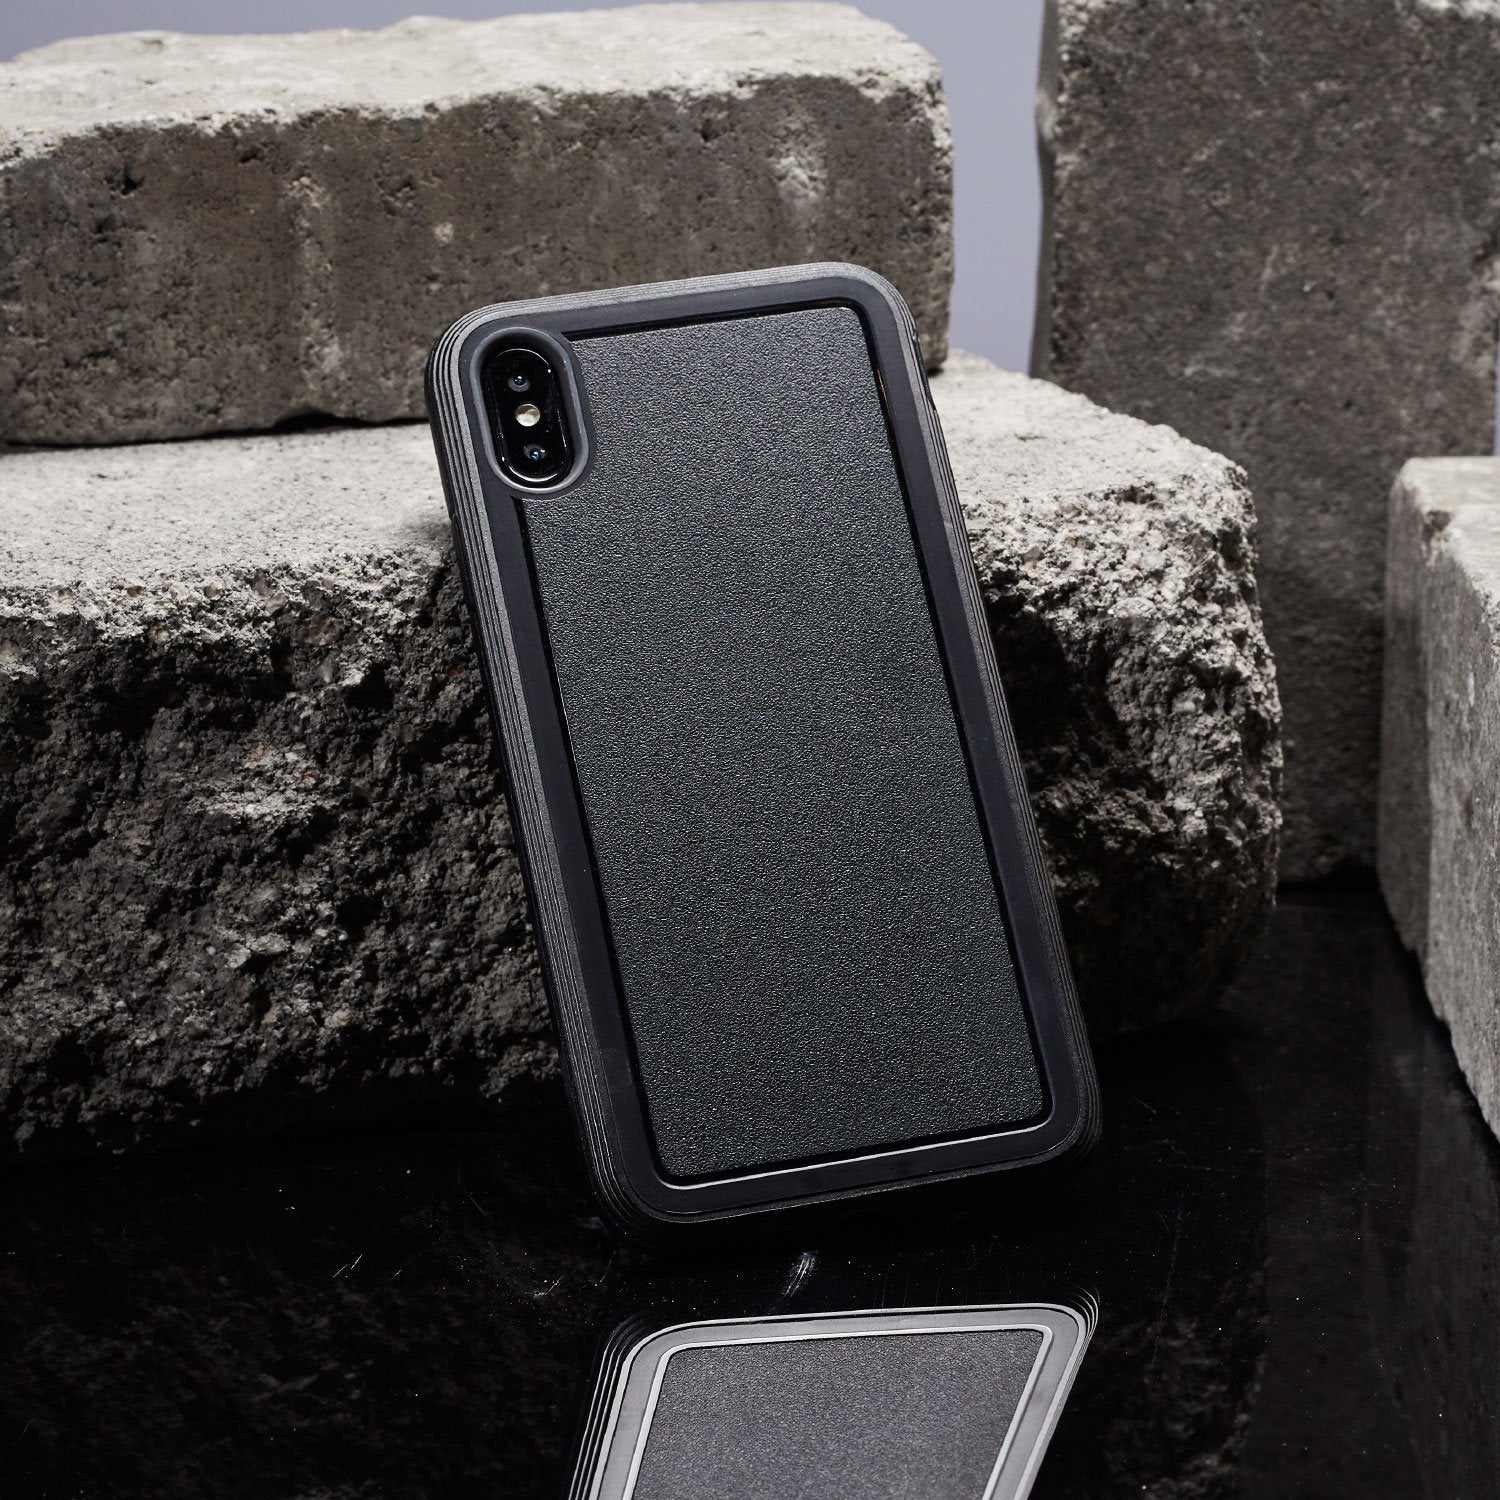 An X-Doria black iPhone Xs Defense Ultra Black case, designed to meet the MIL-STD-810G Standard for device protection, sits on top of some rocks.